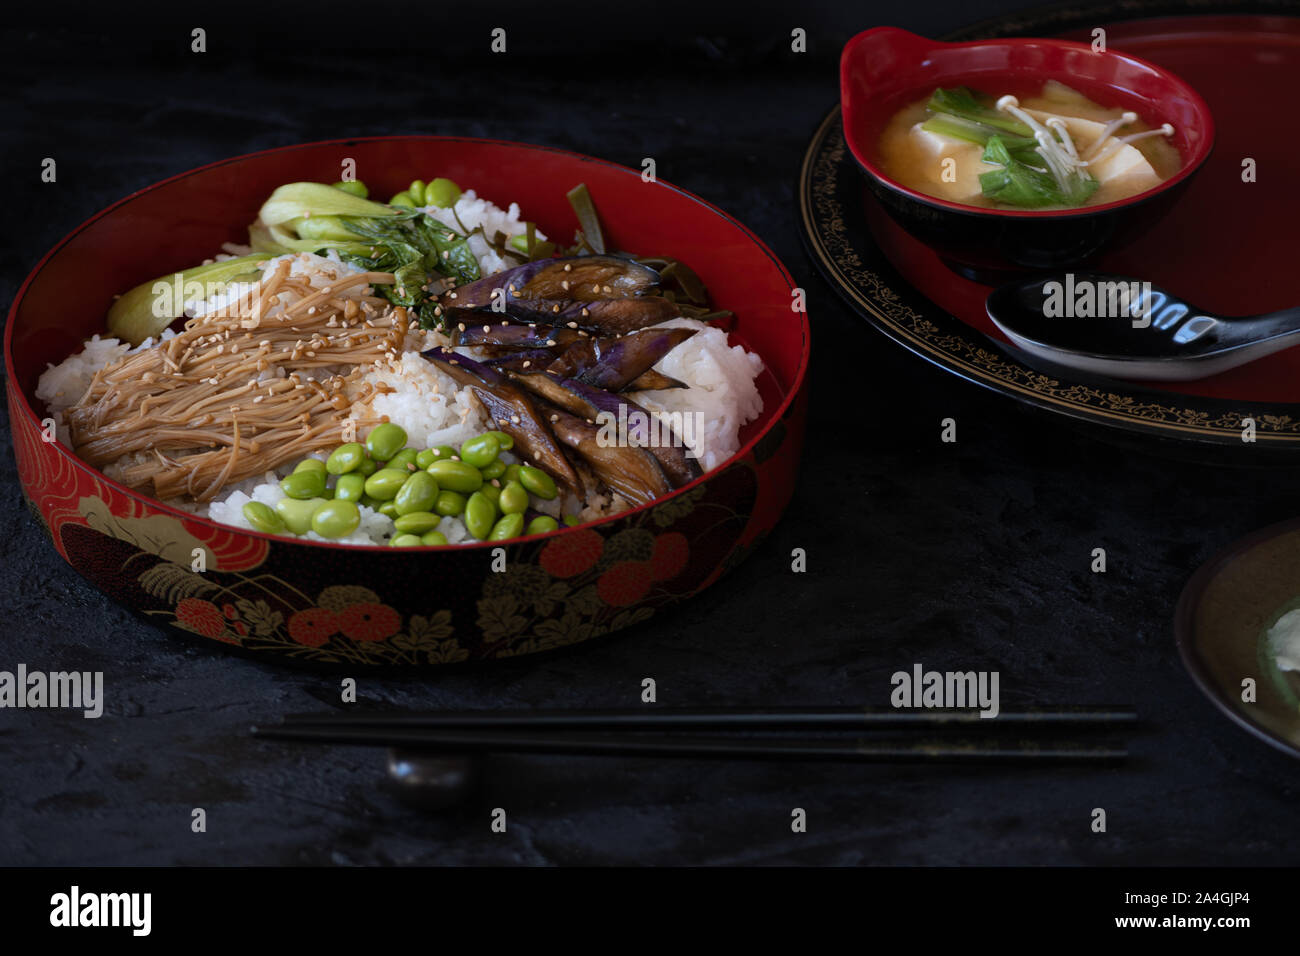 Chirashizushi and miso served in traditional Japanese dishes Stock Photo